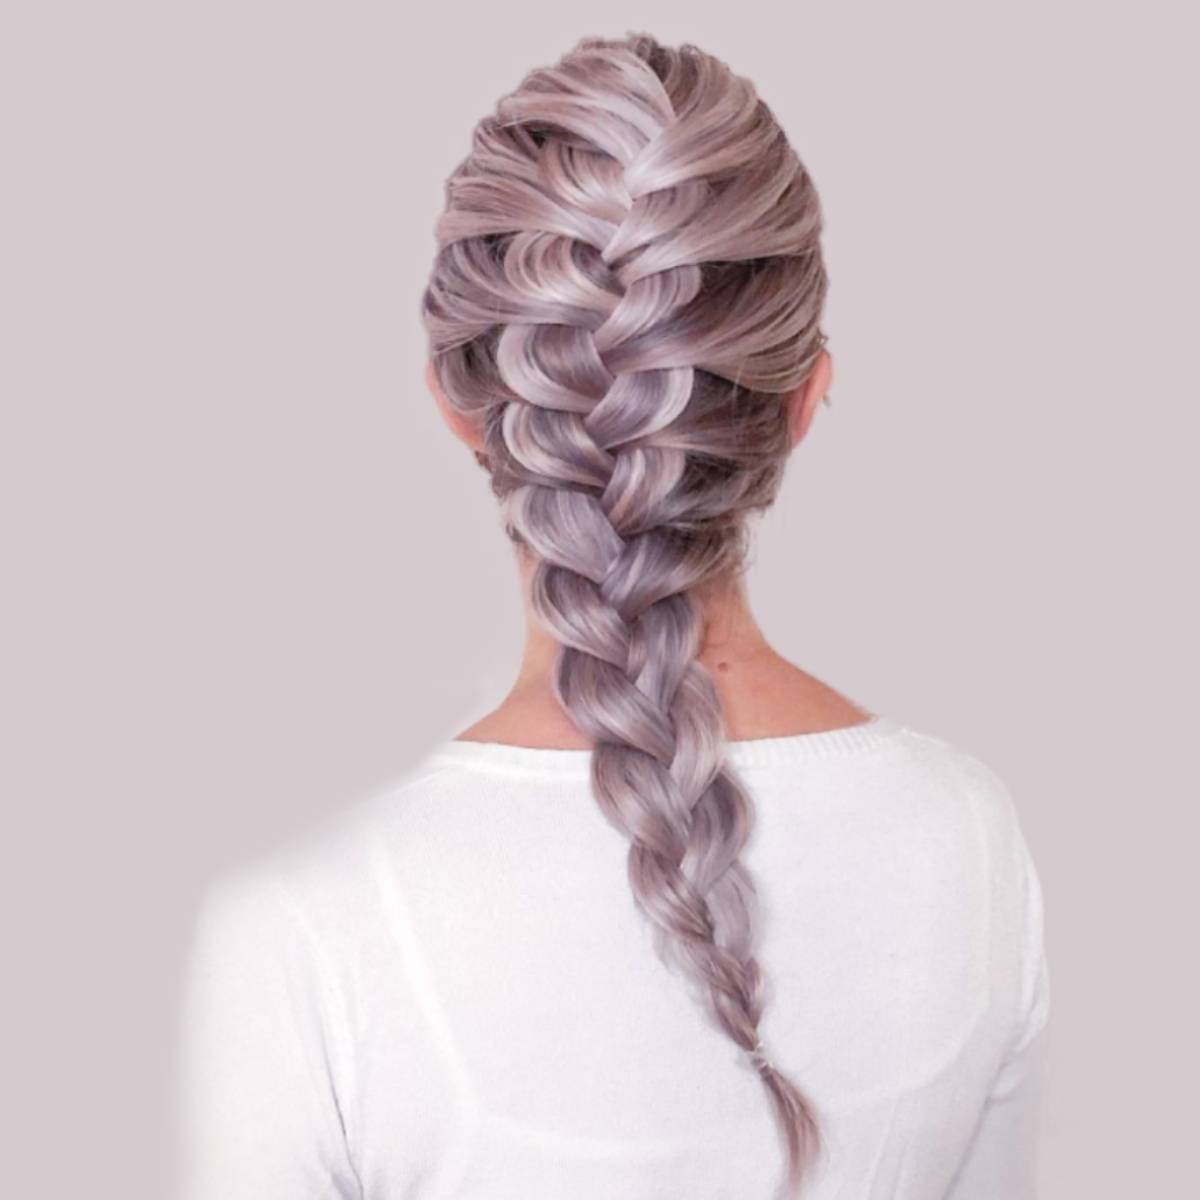 How To French Braid  Hairstyles For Girls  Princess Hairstyles